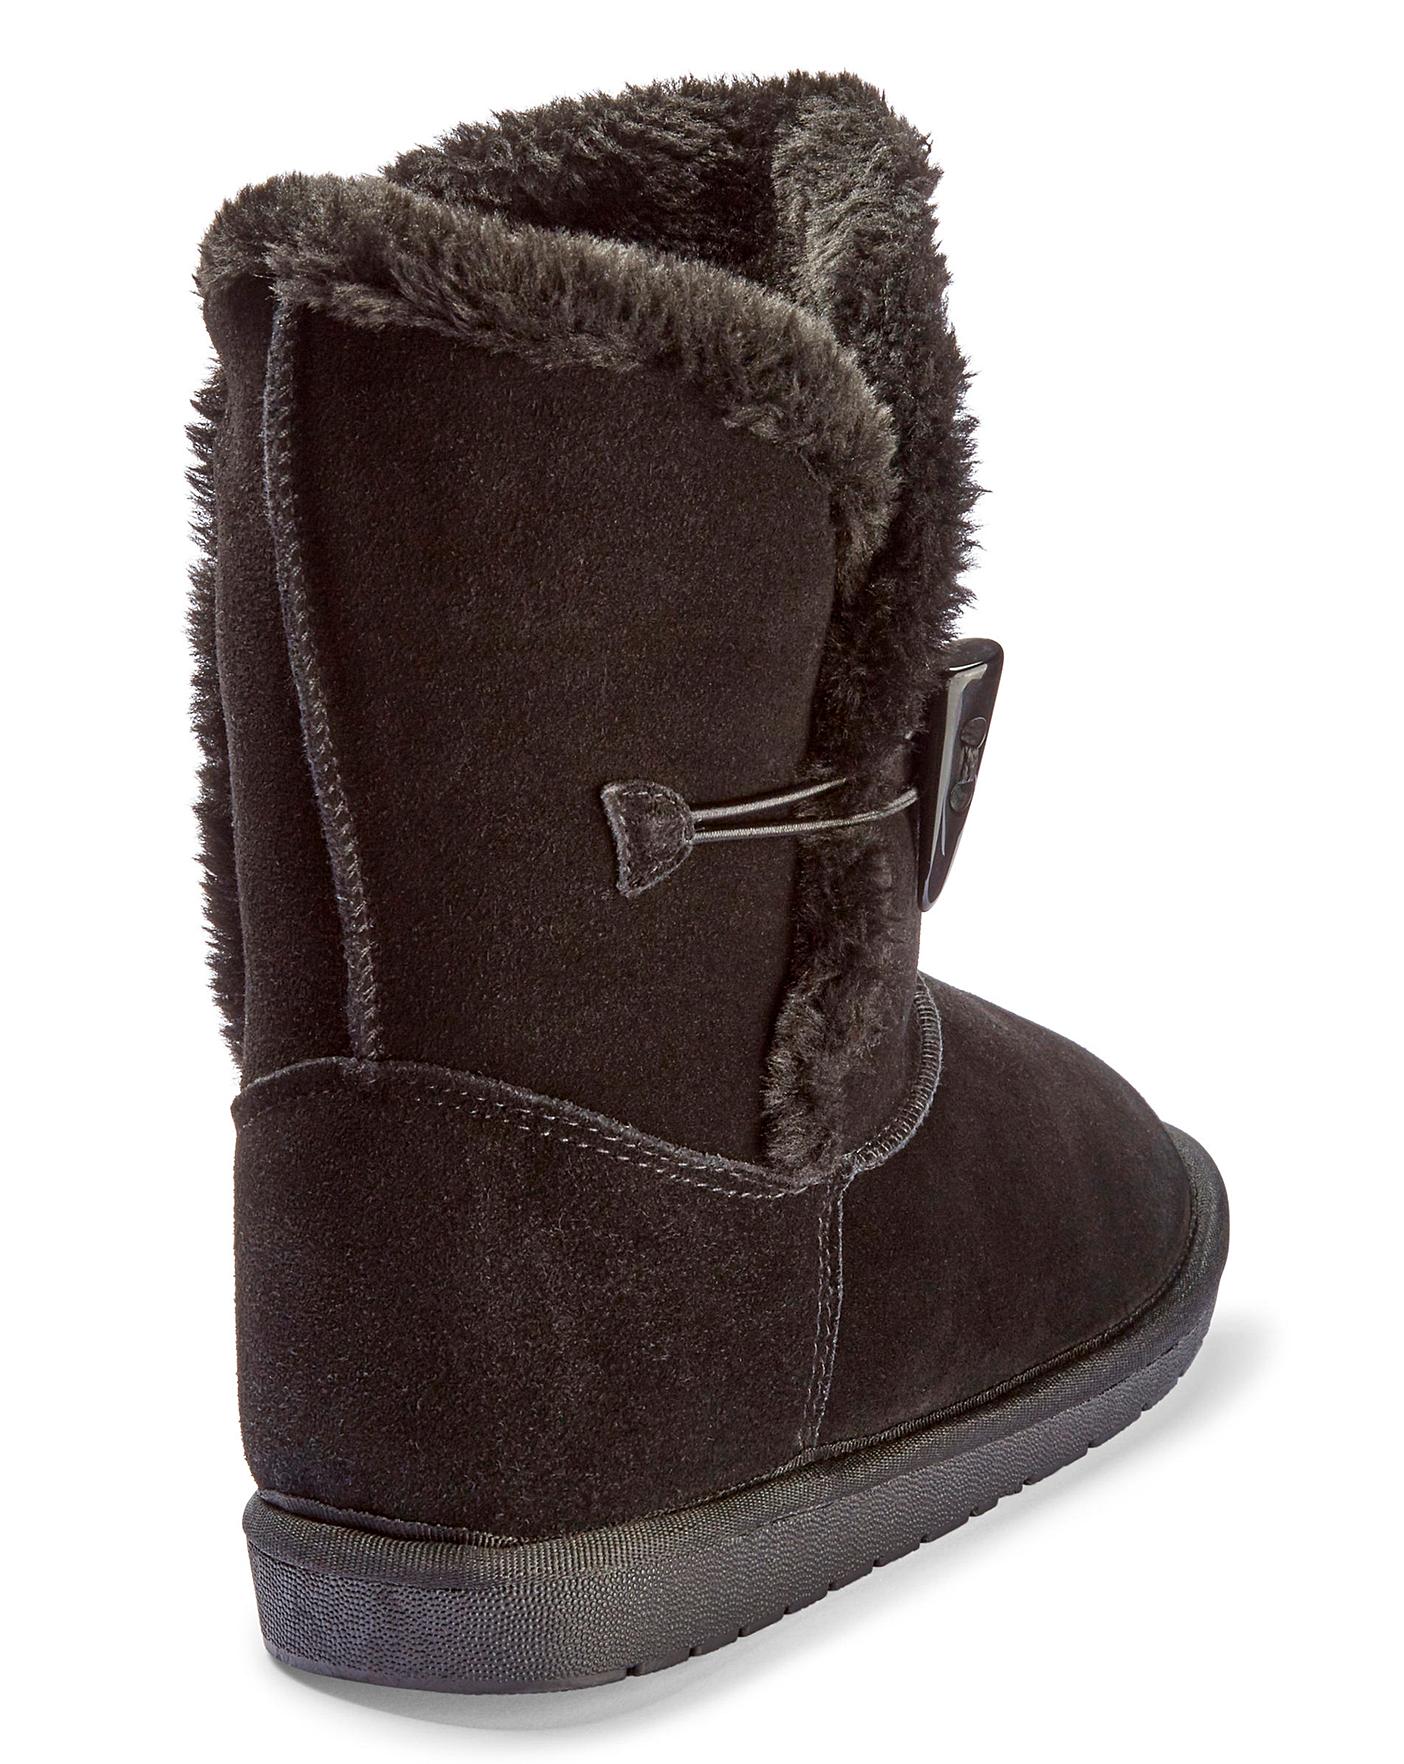 Suede Warm Lined Ankle Boots EEE Fit | J D Williams